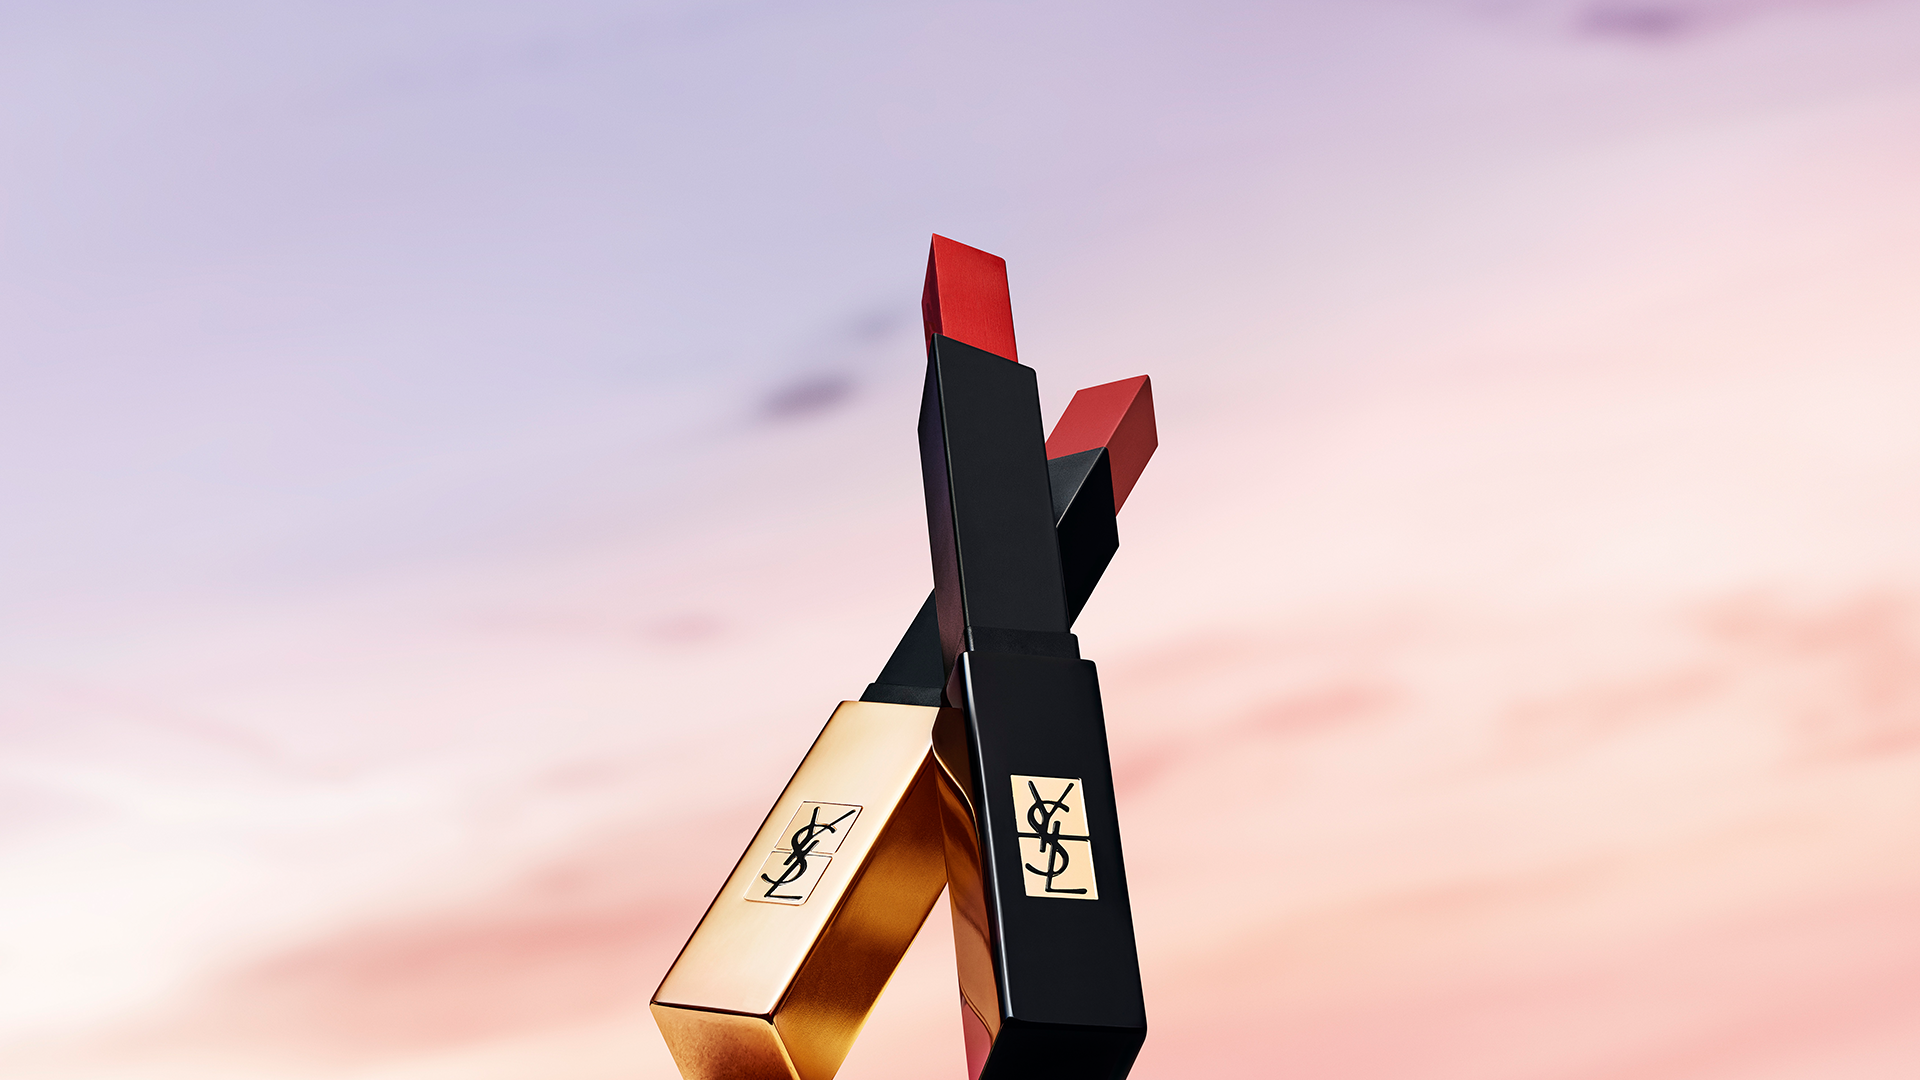 Photography of two YSL red lipsticks - the slim and the slim velvet fallin down in a sunset pinky sky